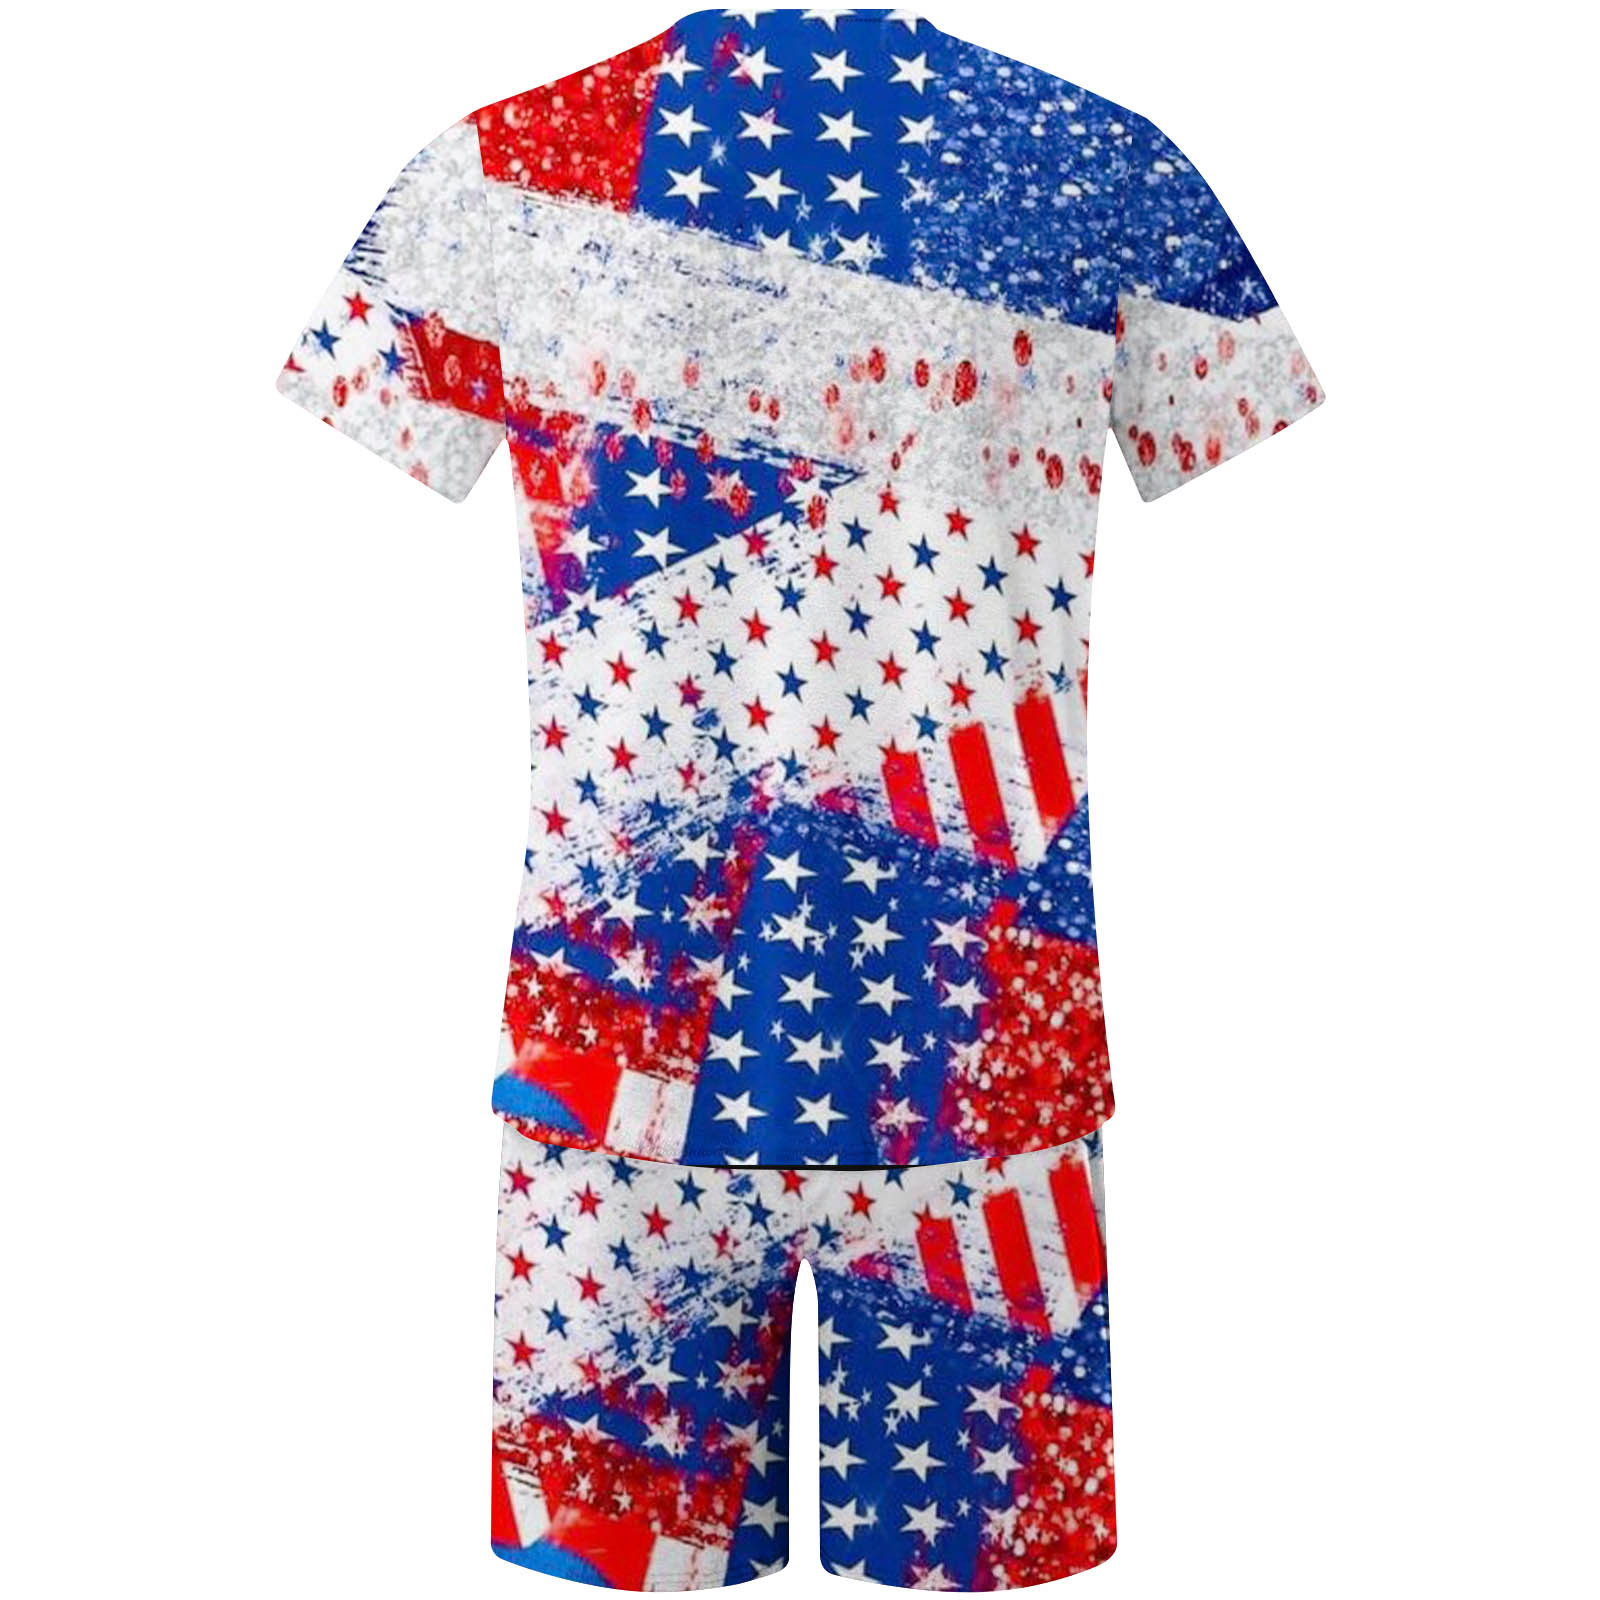 WQJNWEQ Christmas Formal Cloth Sale New Arrival 4th of July Men's 3D ...